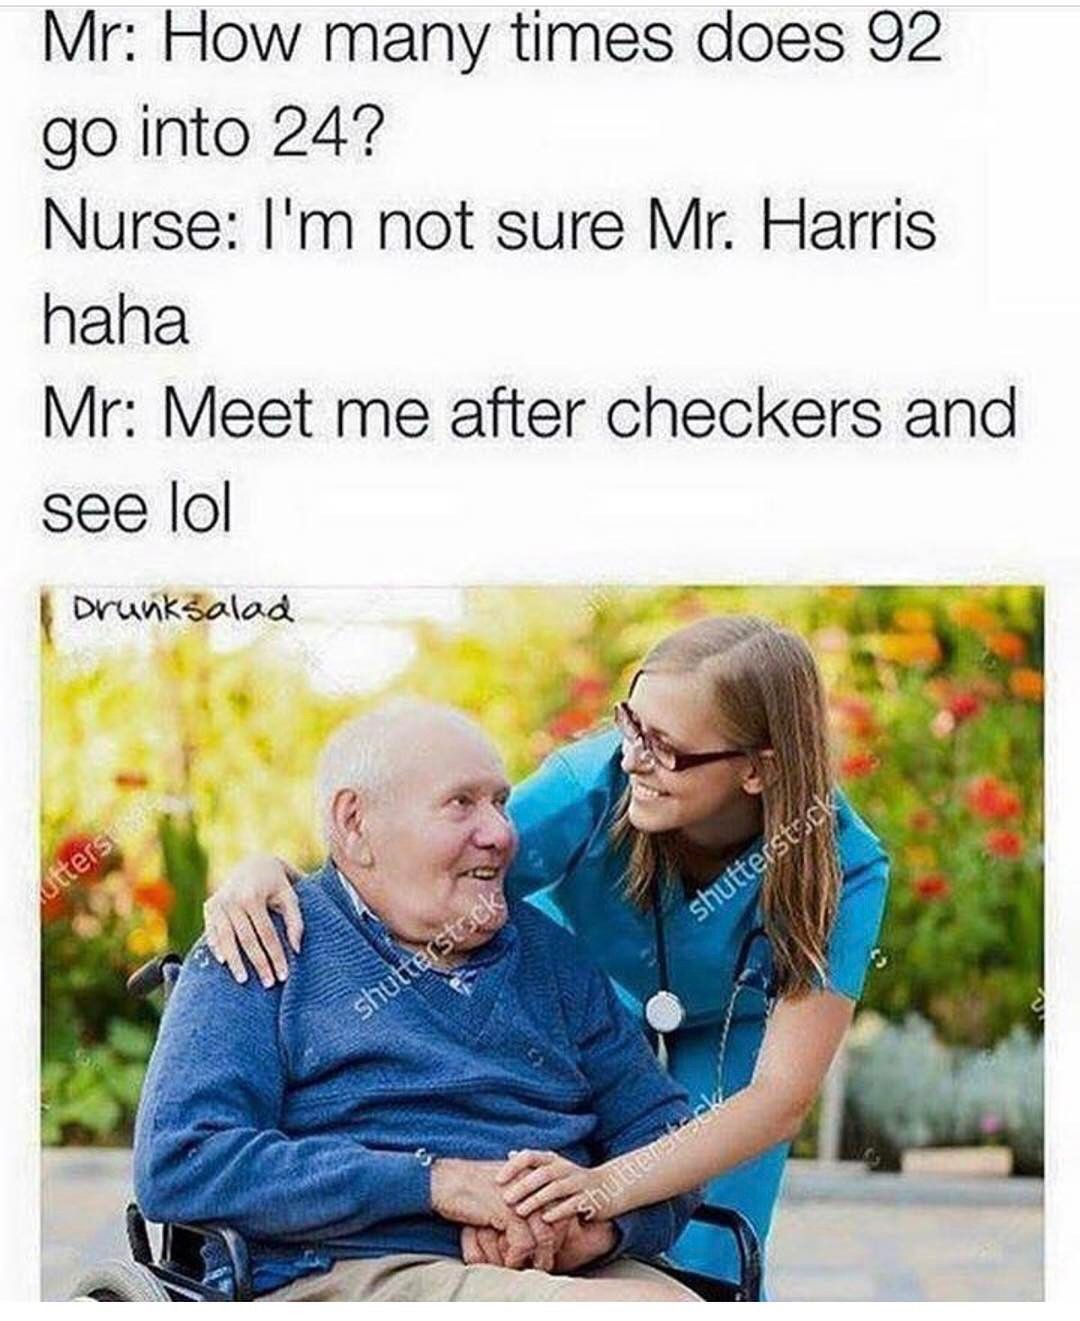 memes - funny 2017 dank memes - Mr How many times does 92 go into 24? Nurse I'm not sure Mr. Harris haha Mr Meet me after checkers and see lol Drunksalad utterste shutterstock shutterstock shuttermesick.